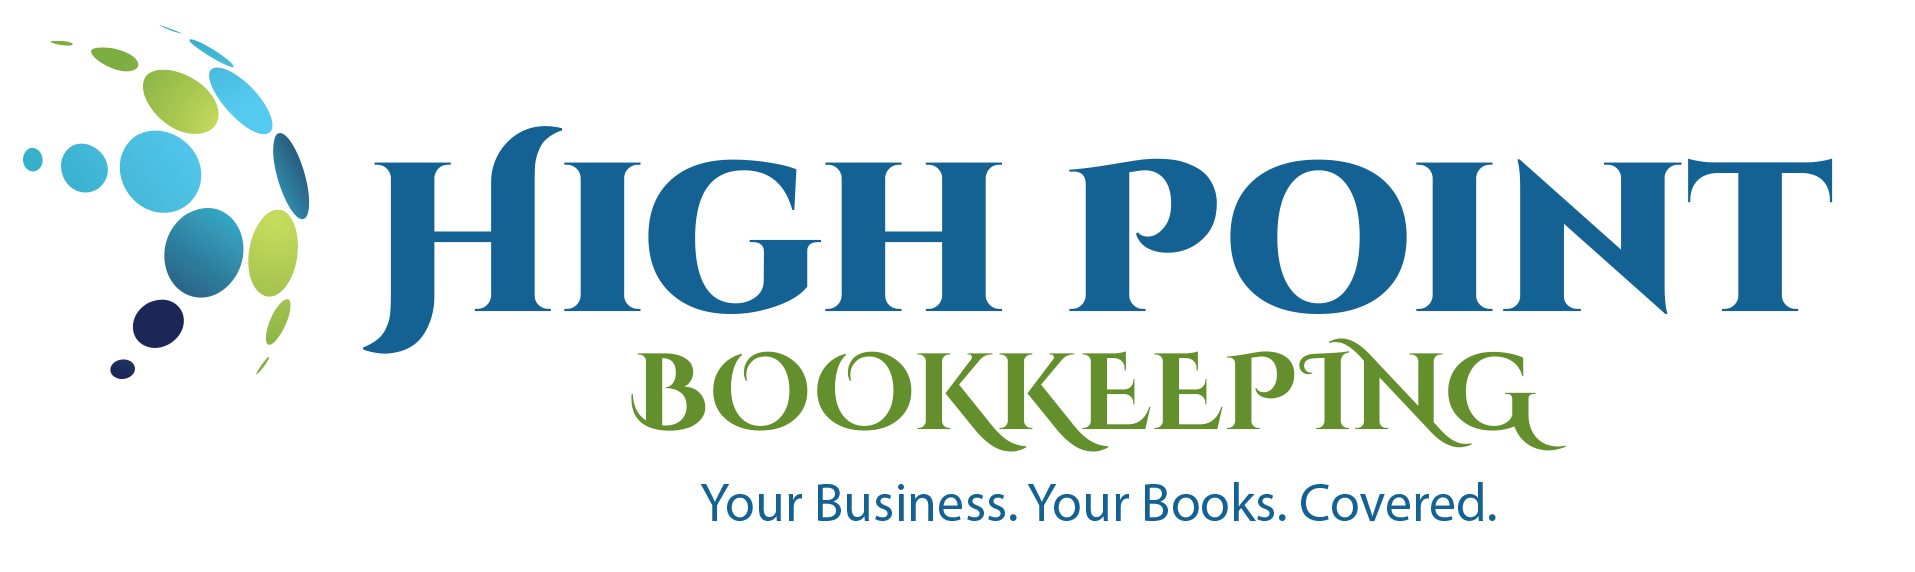 High Point Bookkeeping